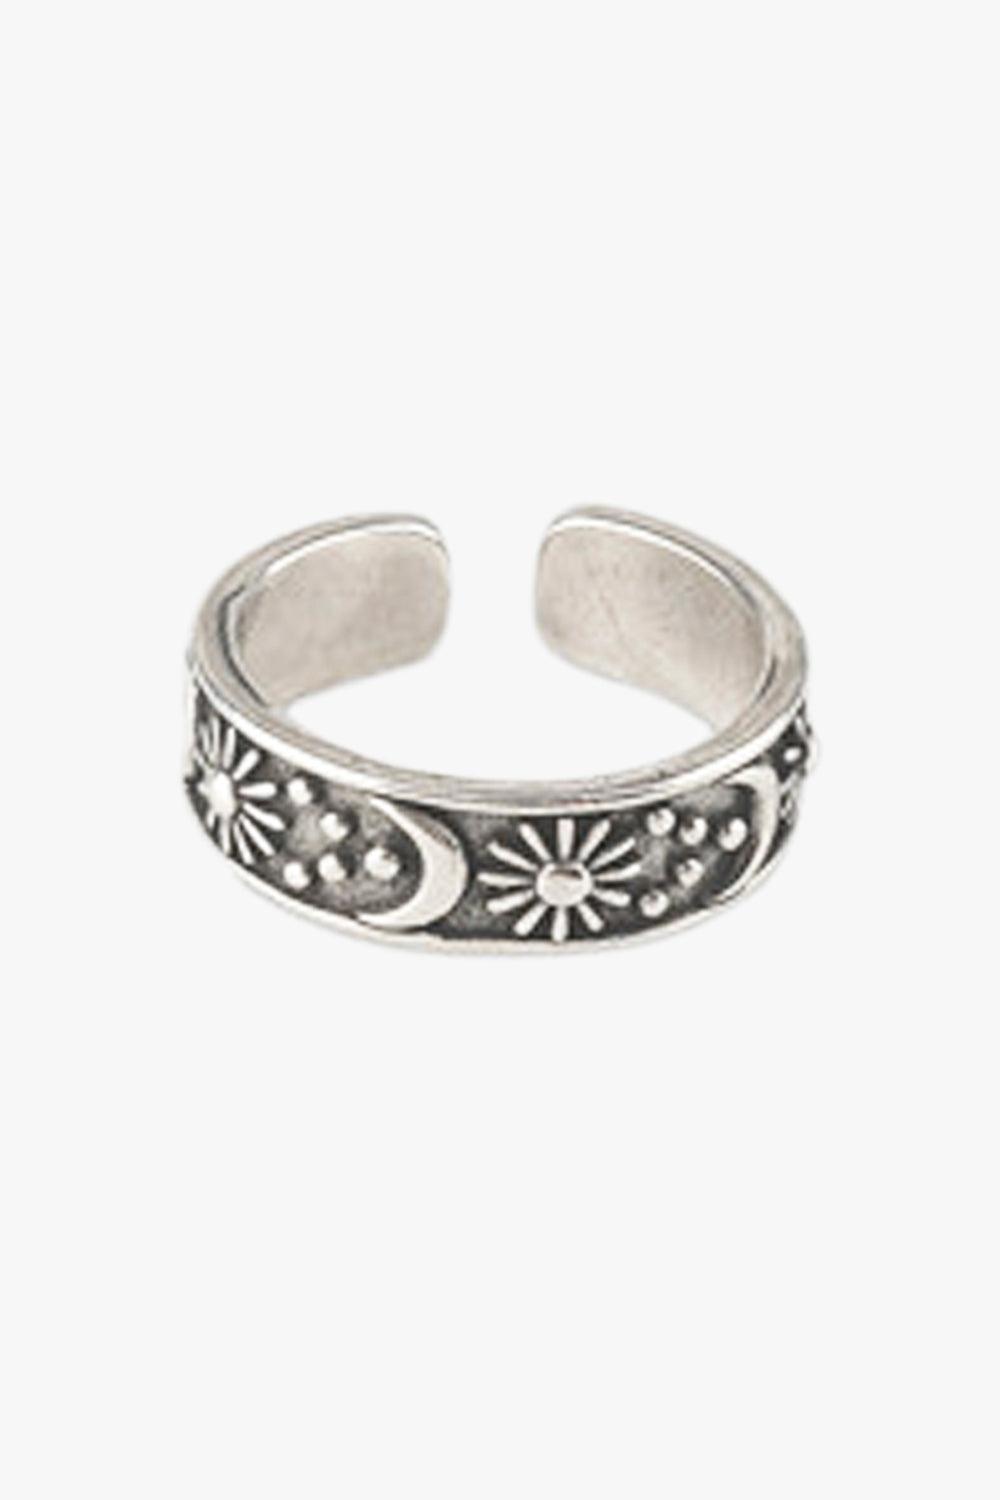 Celestial Aesthetic Sun and Moon Ring - Aesthetic Clothes Shop